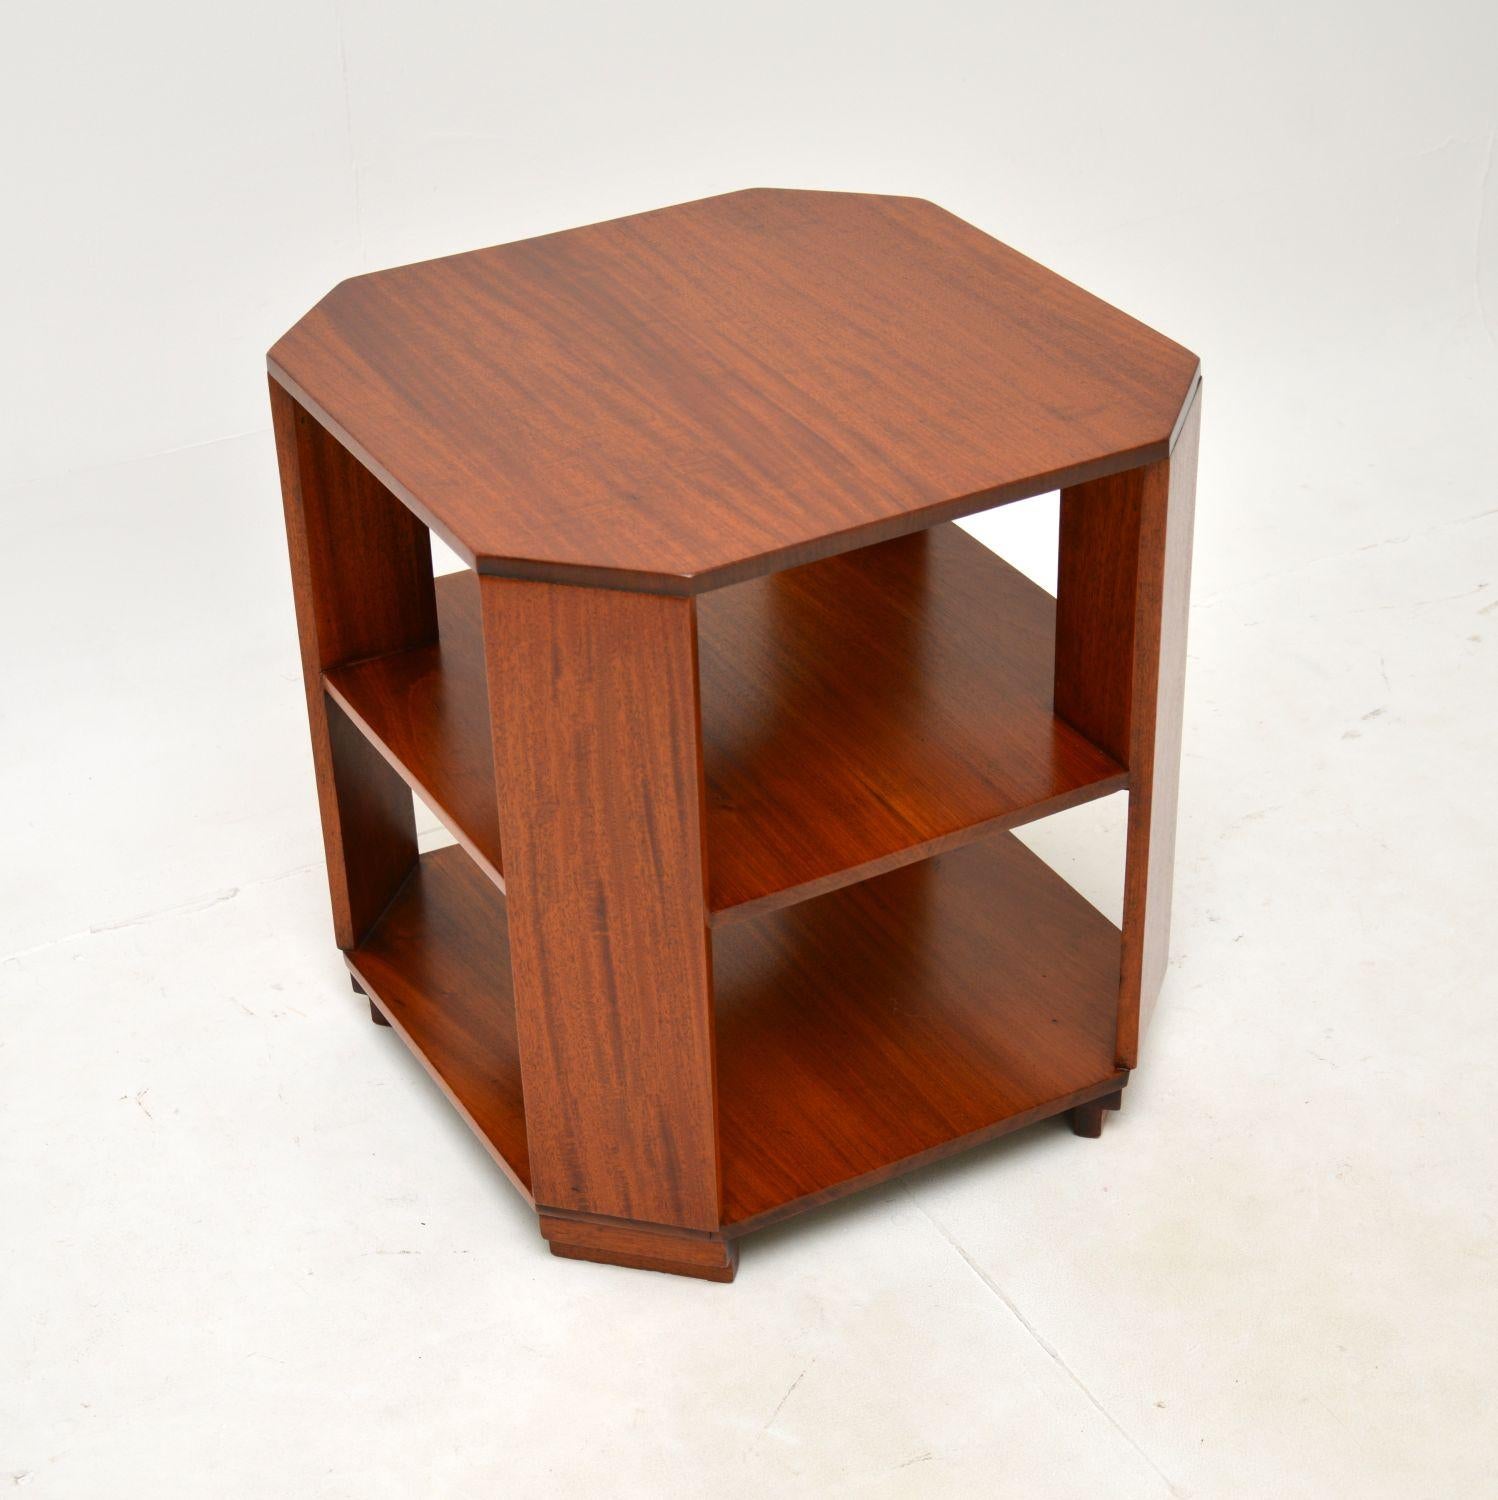 A lovely Art Deco walnut occasional coffee / side table. This was made in England, it dates from the 1920-30’s.

It is of superb quality, this is very well made and has a useful design. It is a handy size, with a very practical lower tier. The